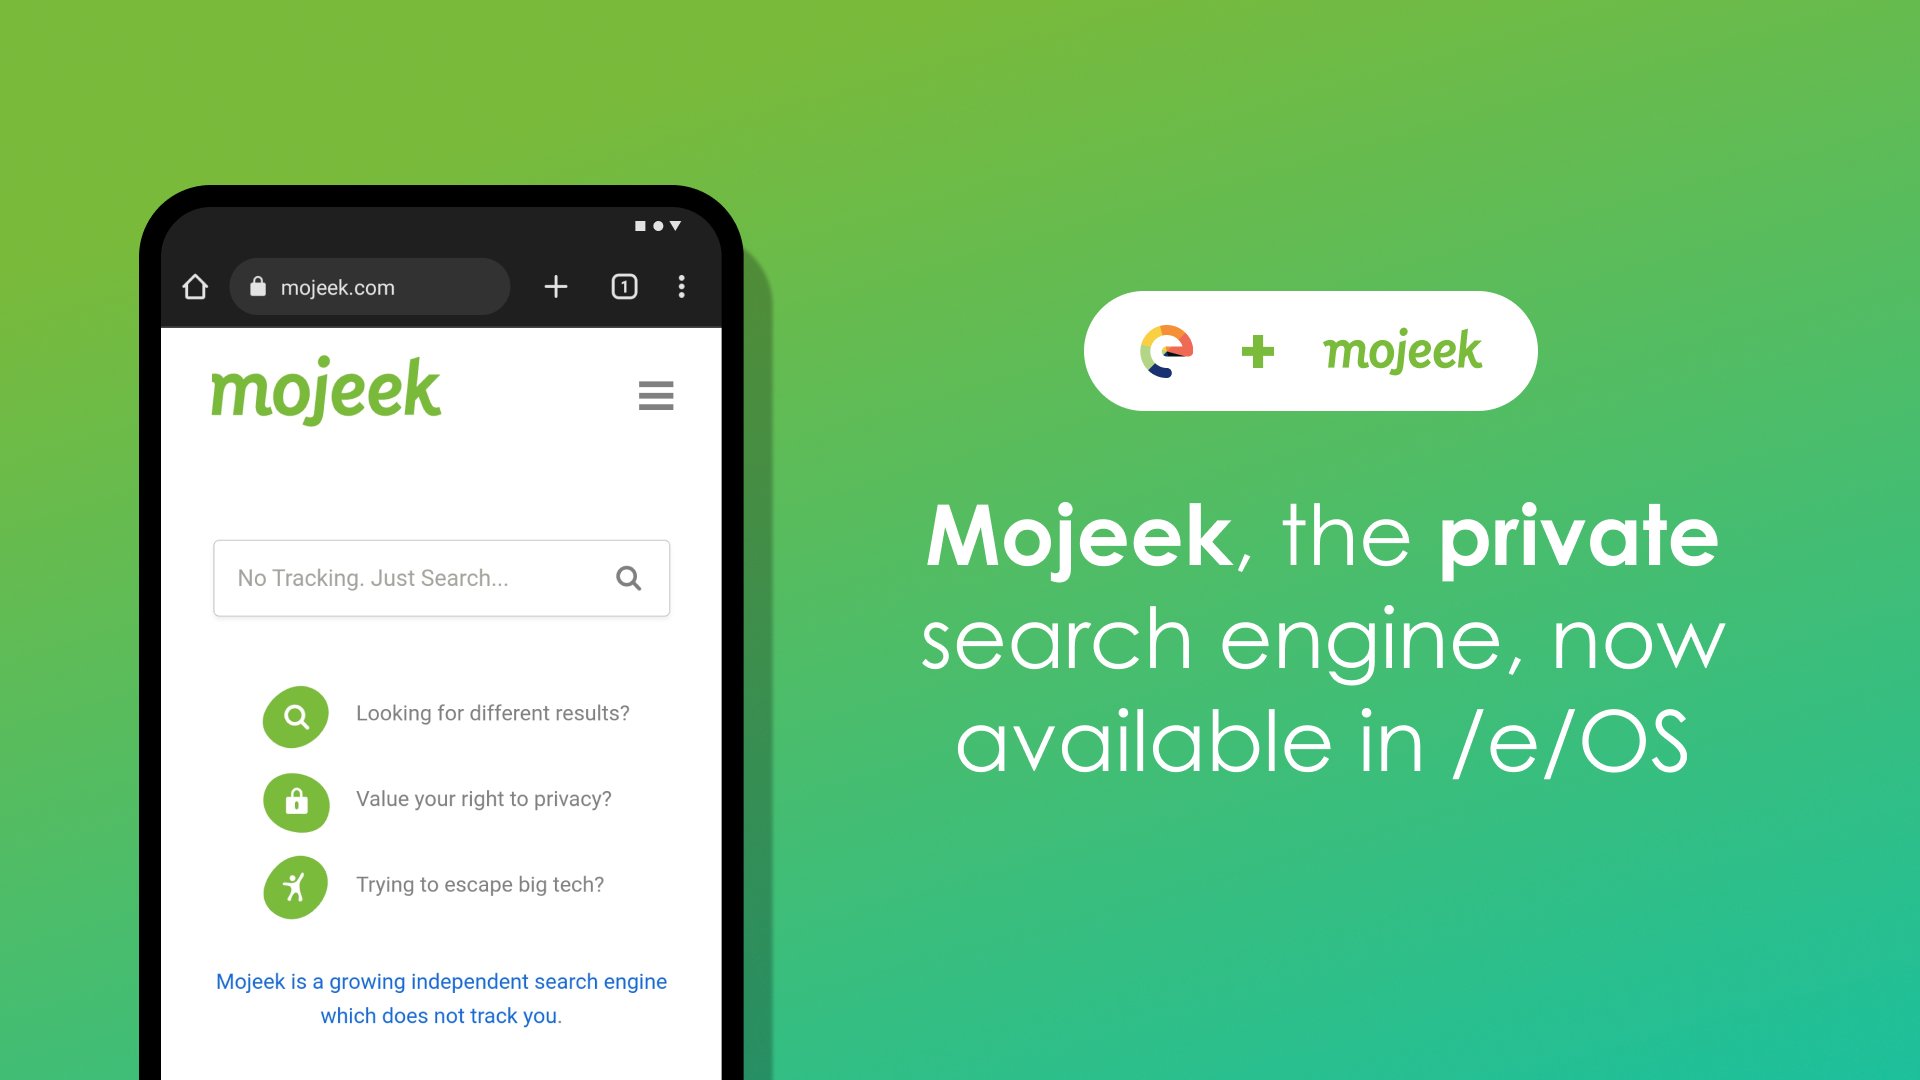 Mojeek search engine on a Murena device running the /e/ operating system, the text says "Mojeek, the private search engine, now available on /e/OS"